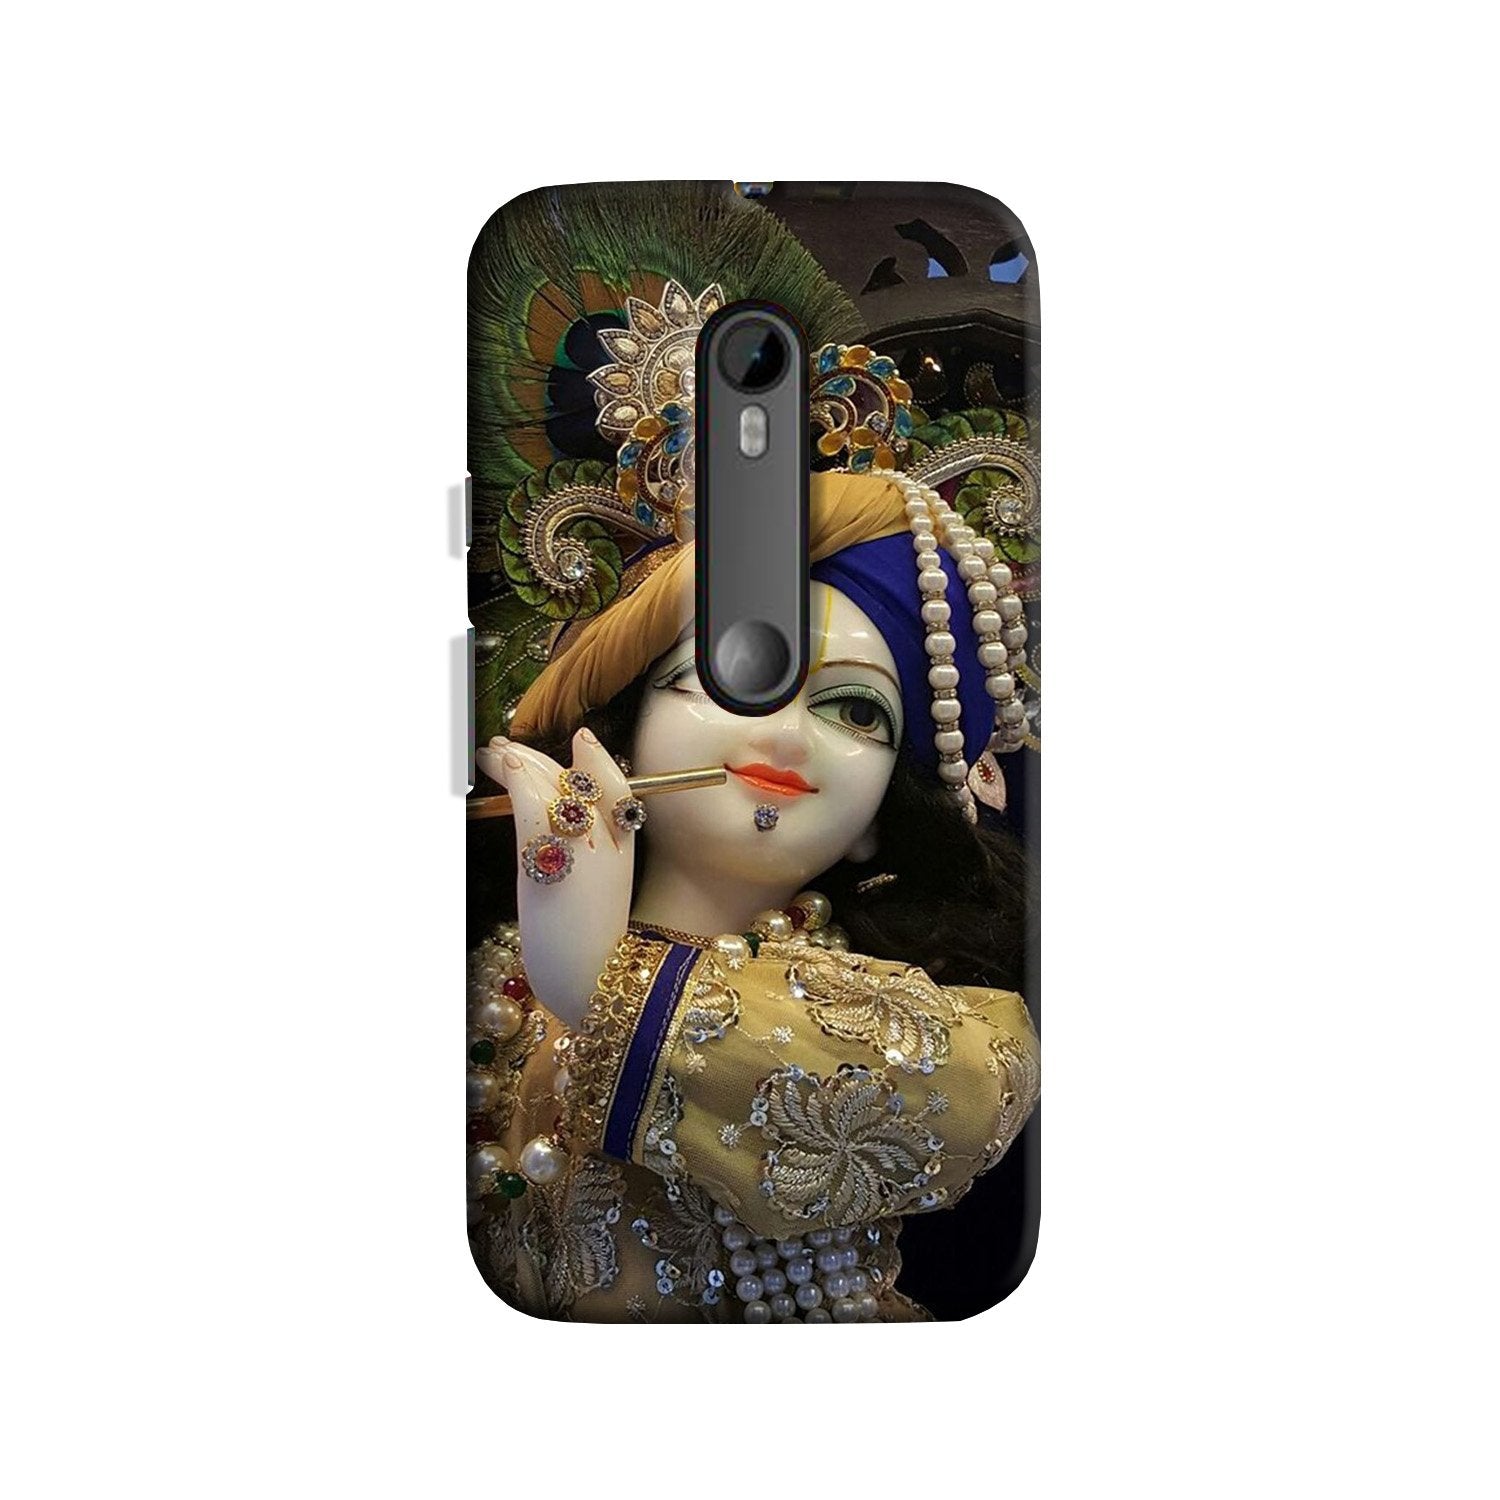 Lord Krishna3 Case for Moto X Force